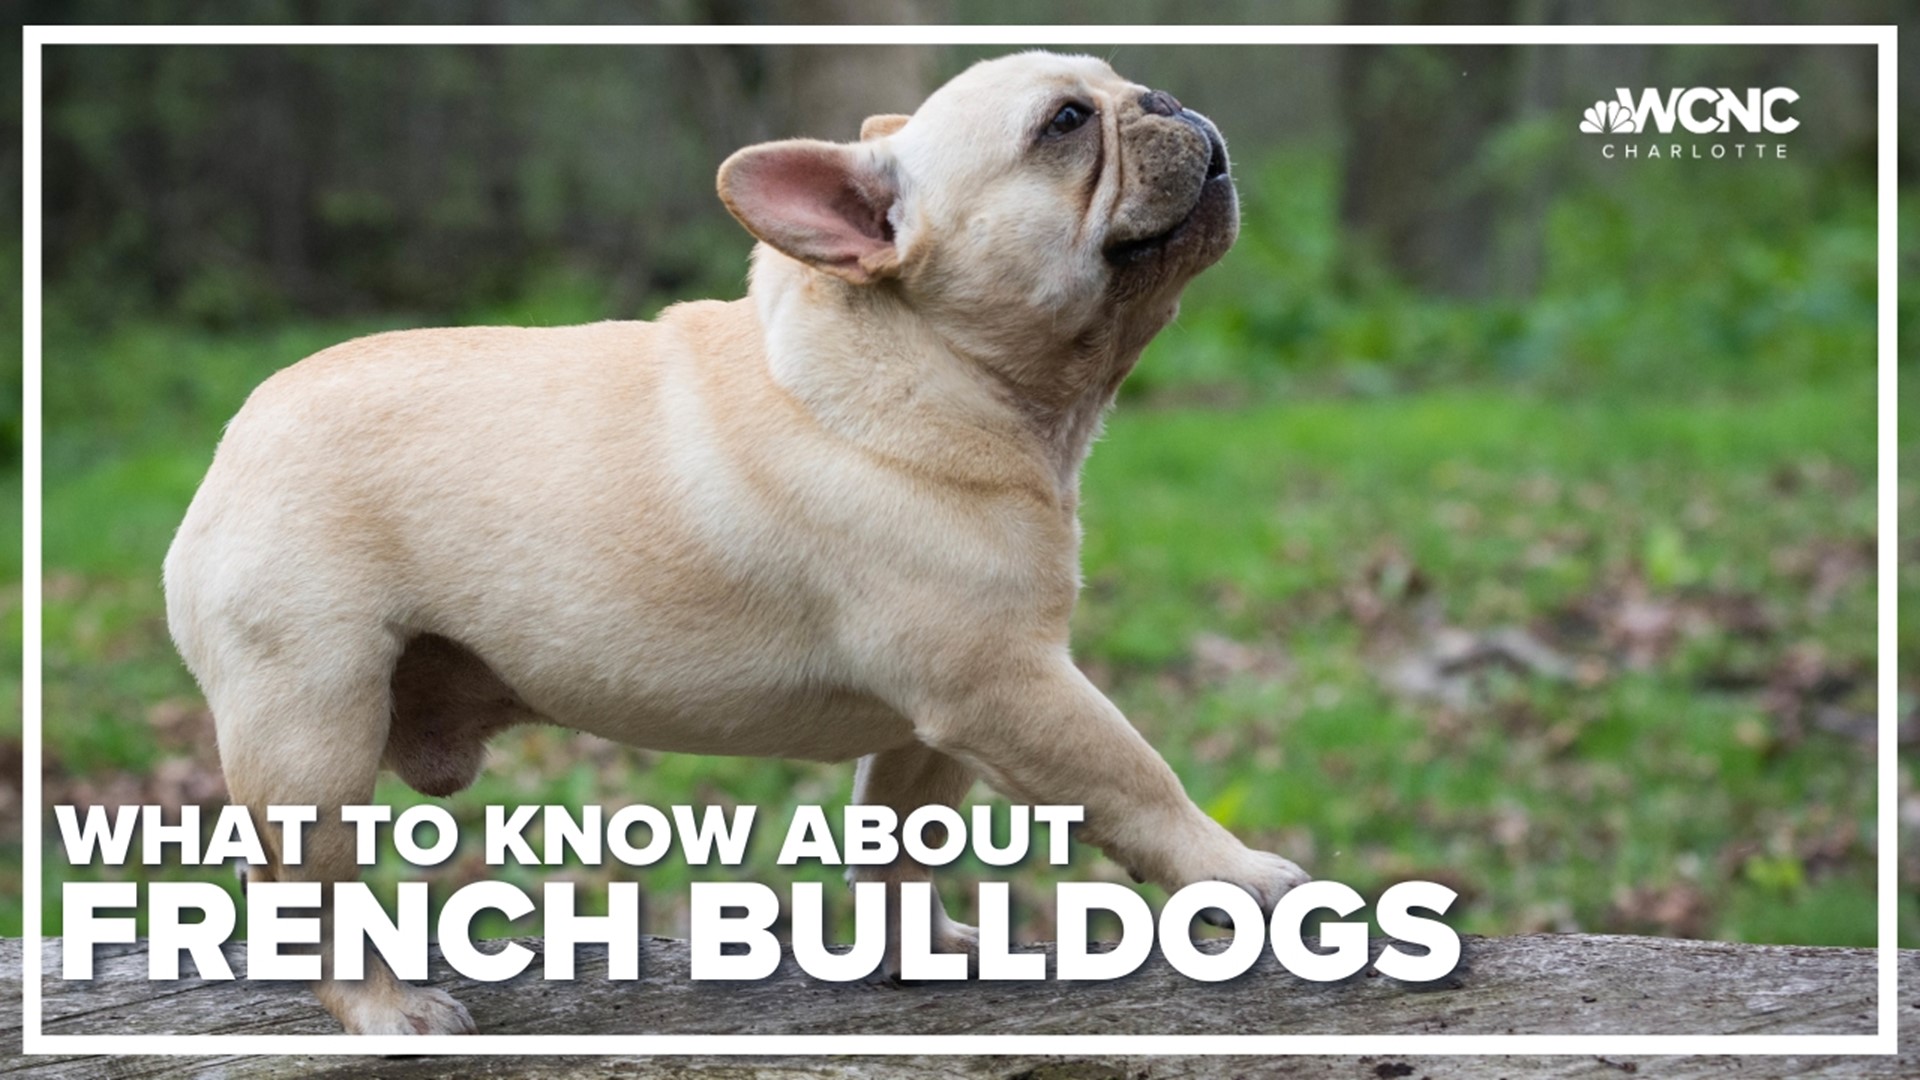 The French bulldog became the nation's most prevalent purebred dog last year, but new owners need to know about the breed's unique needs.